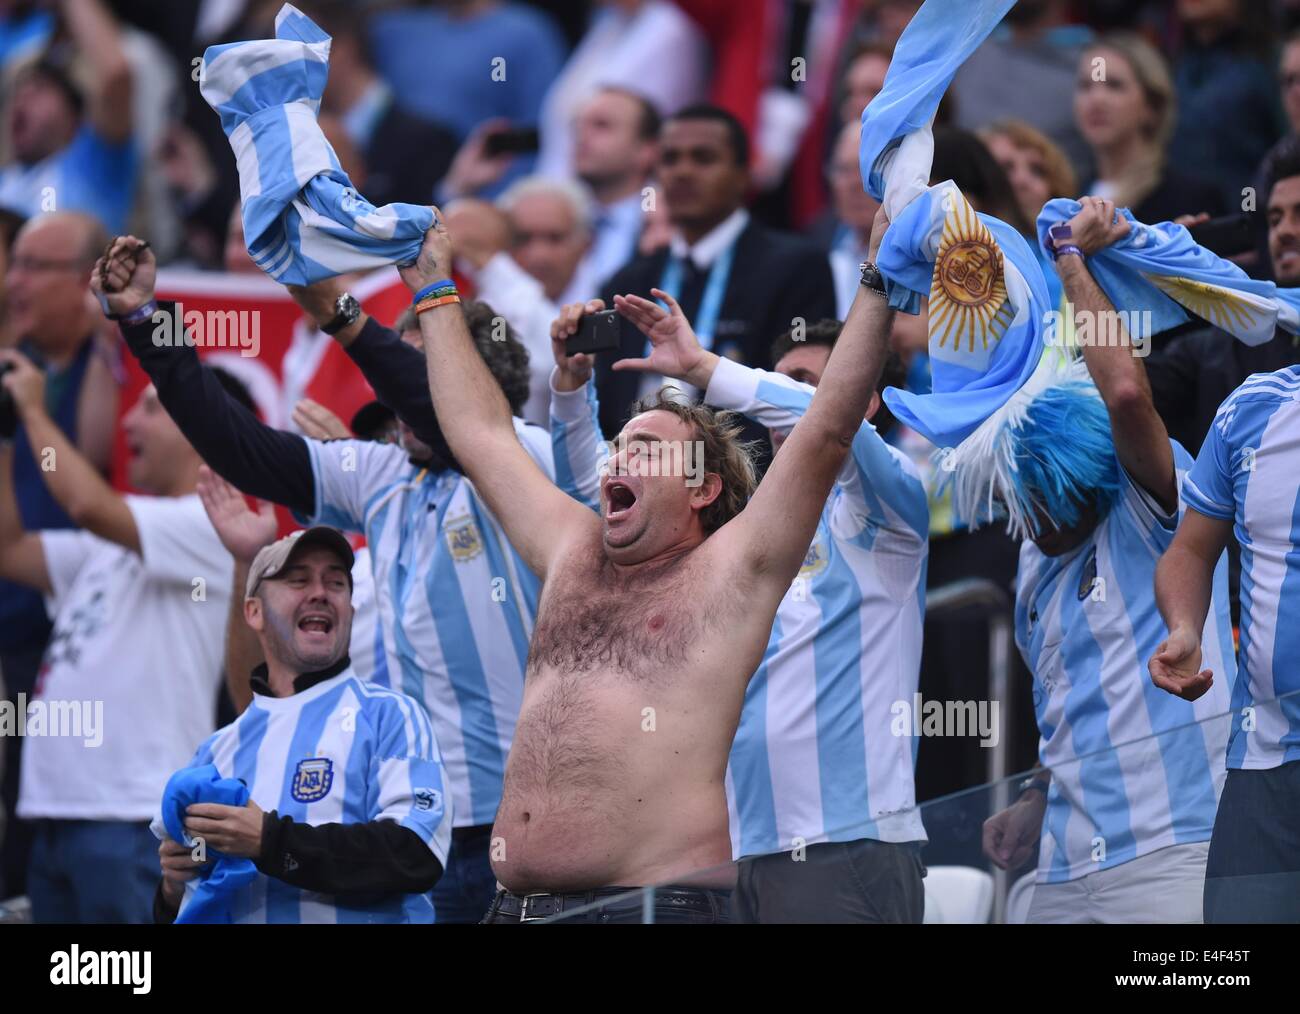 Sao Paulo, Brazil. 09th July, 2014. Supporters of Argentina cheer during the FIFA World Cup 2014 semi-final soccer match between the Netherlands and Argentina at the Arena Corinthians in Sao Paulo, Brazil, 09 July 2014. Photo: Marius Becker/dpa/Alamy Live News Stock Photo